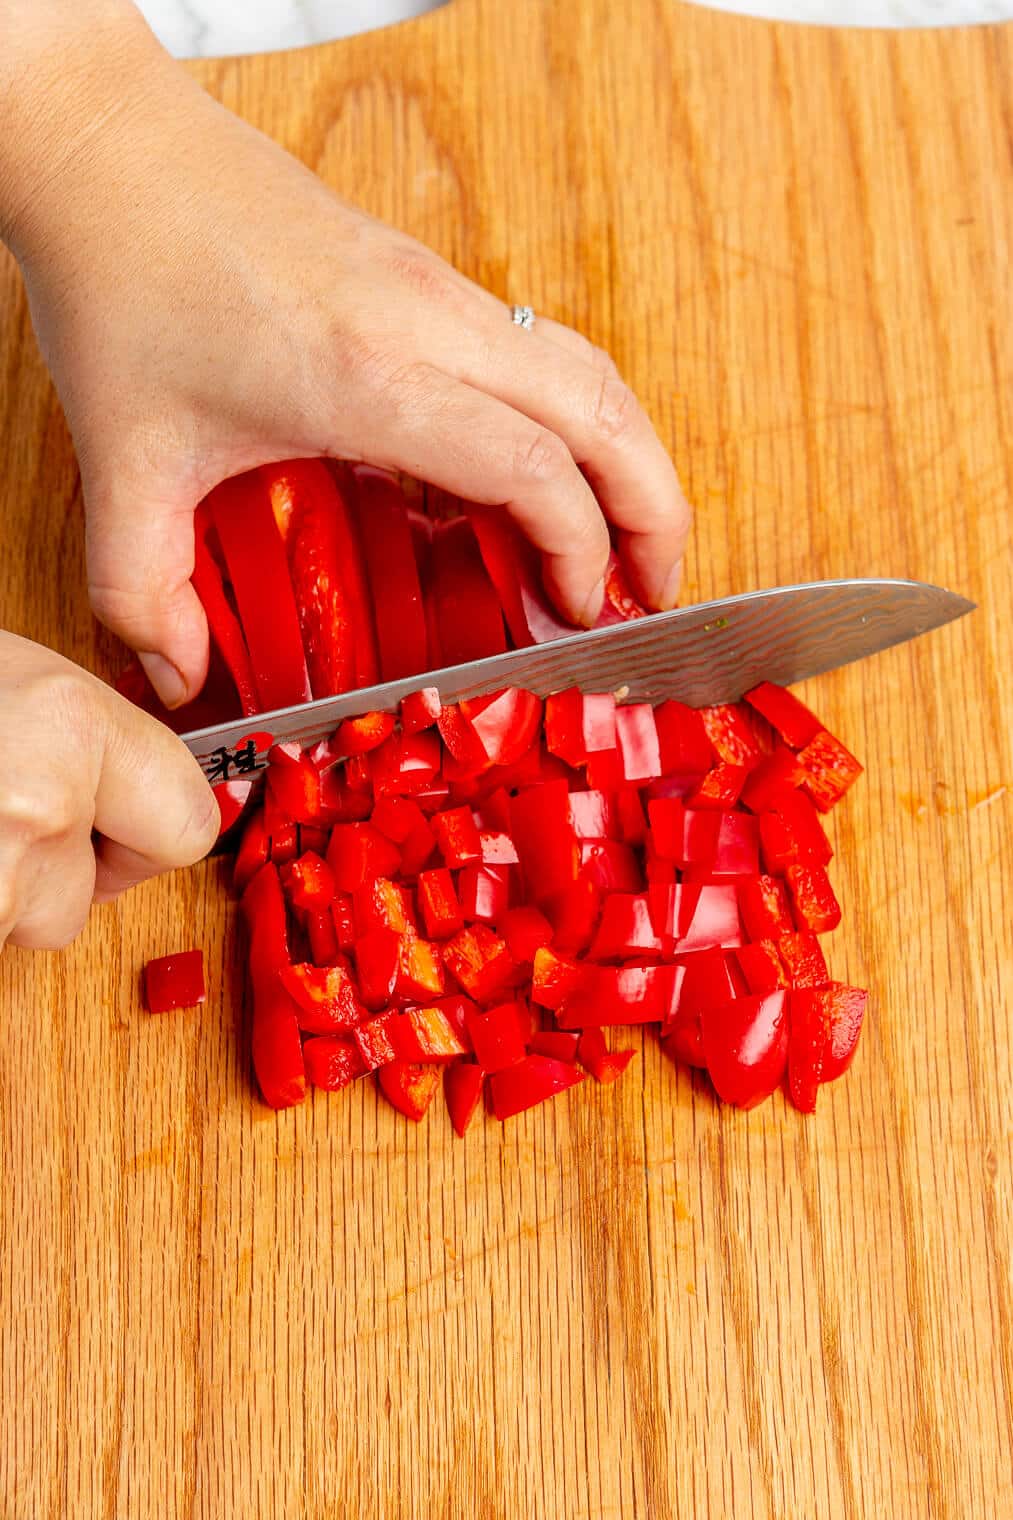 Hand dicing red peppers on a wooden cutting board.